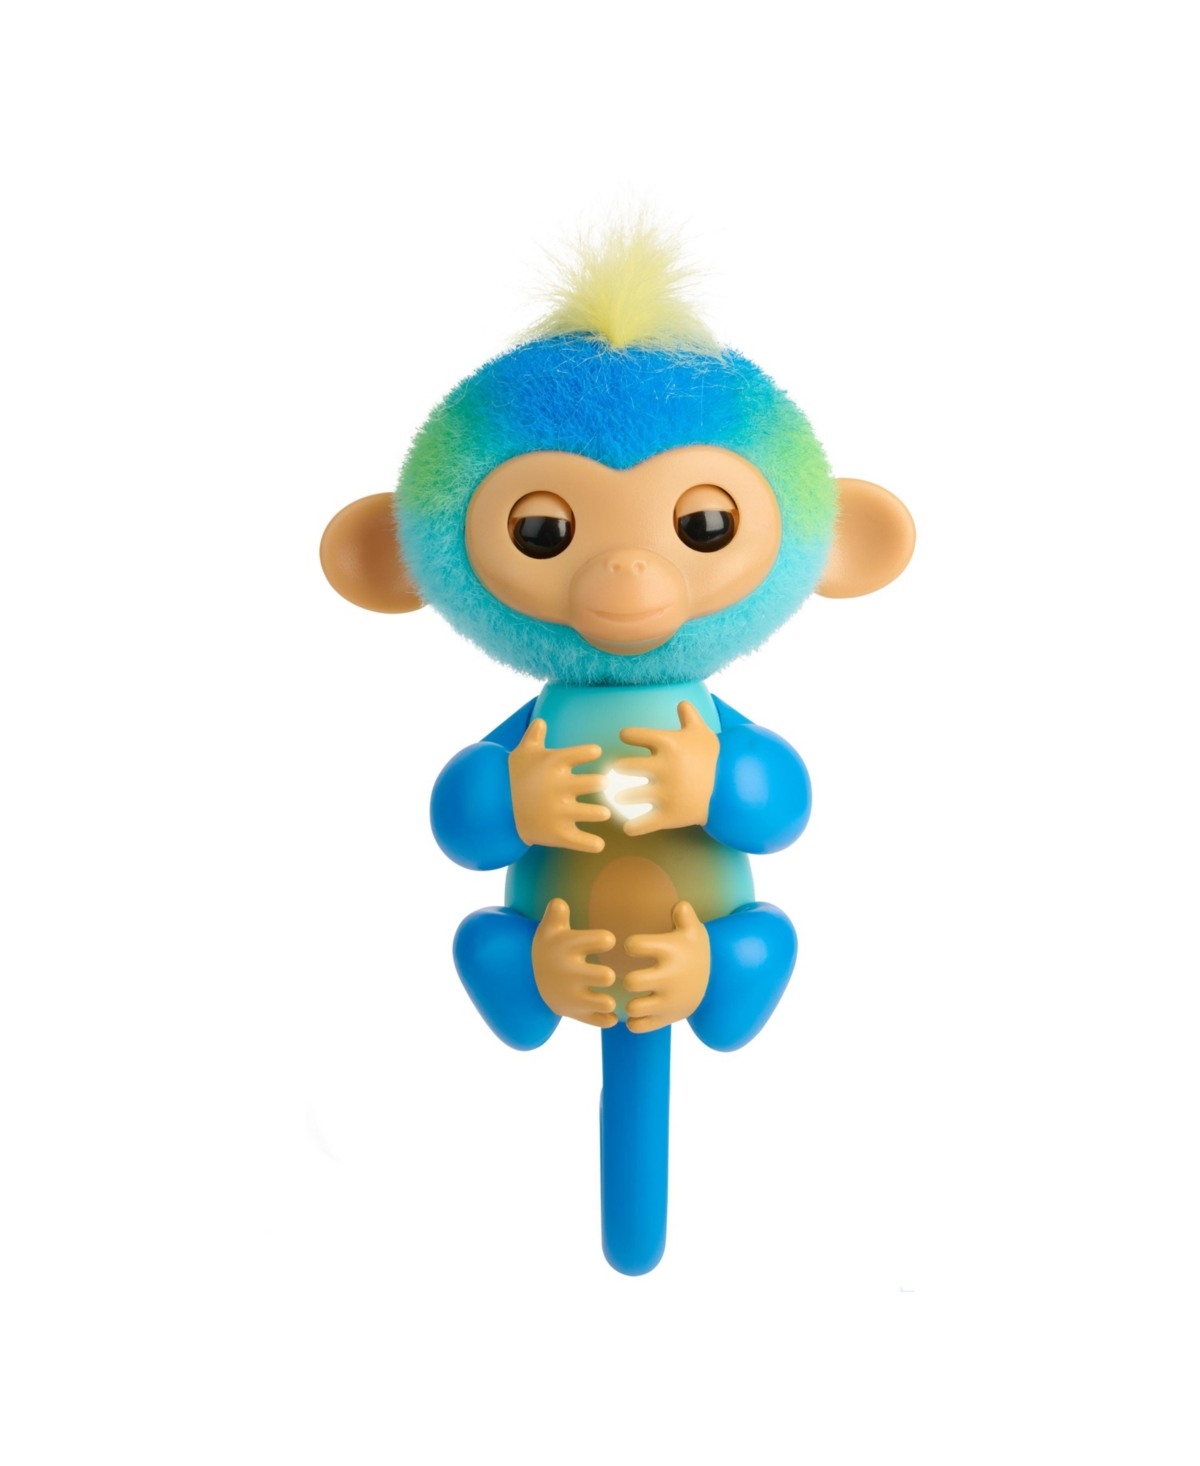 Fingerlings Interactive Baby Monkey Reacts To Touch Â 70+ Sounds & Reactions, Leo In No Color